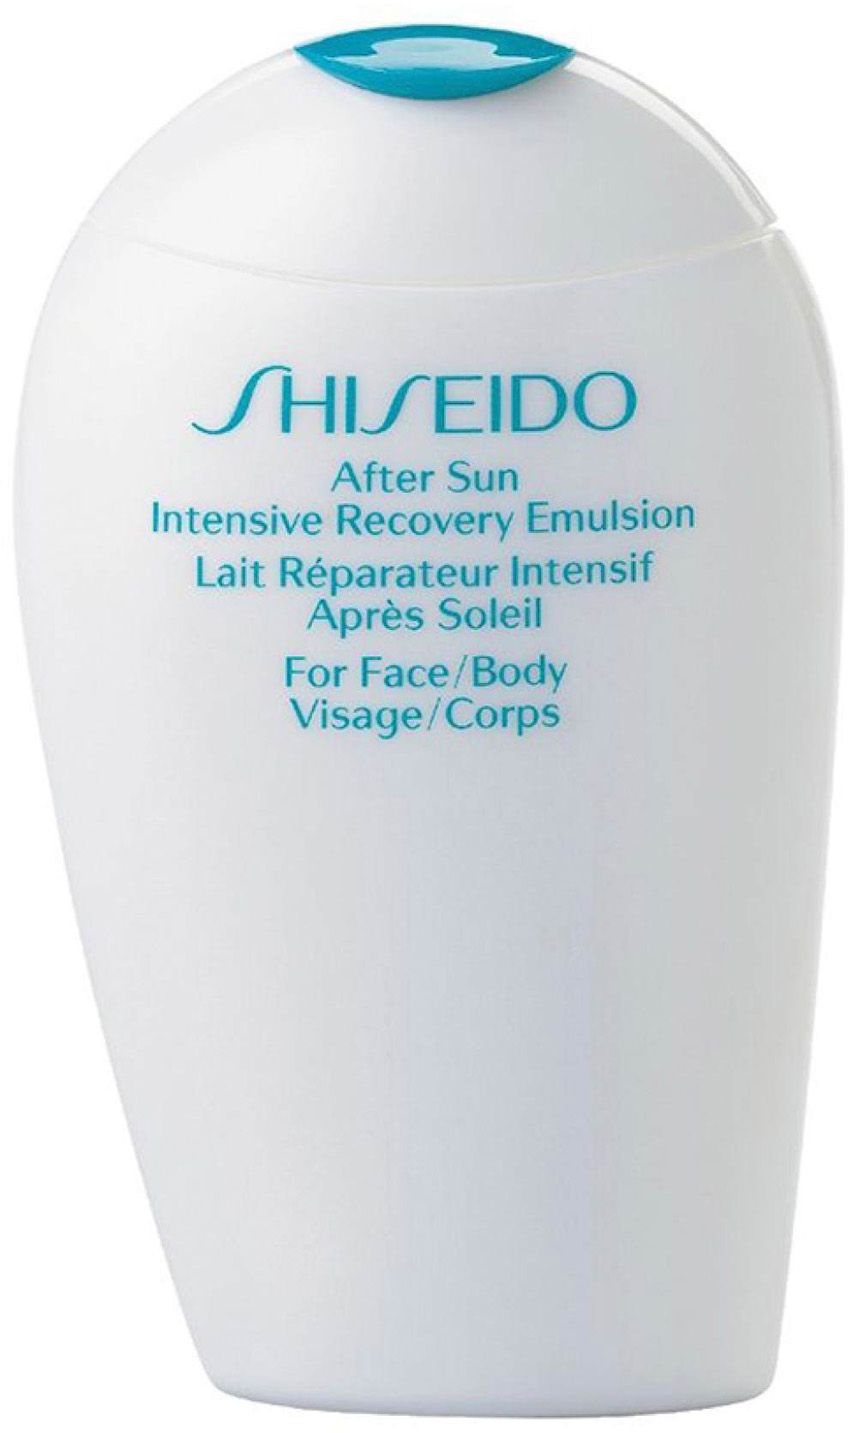 after sun intensive recovery emulsion – for face-body